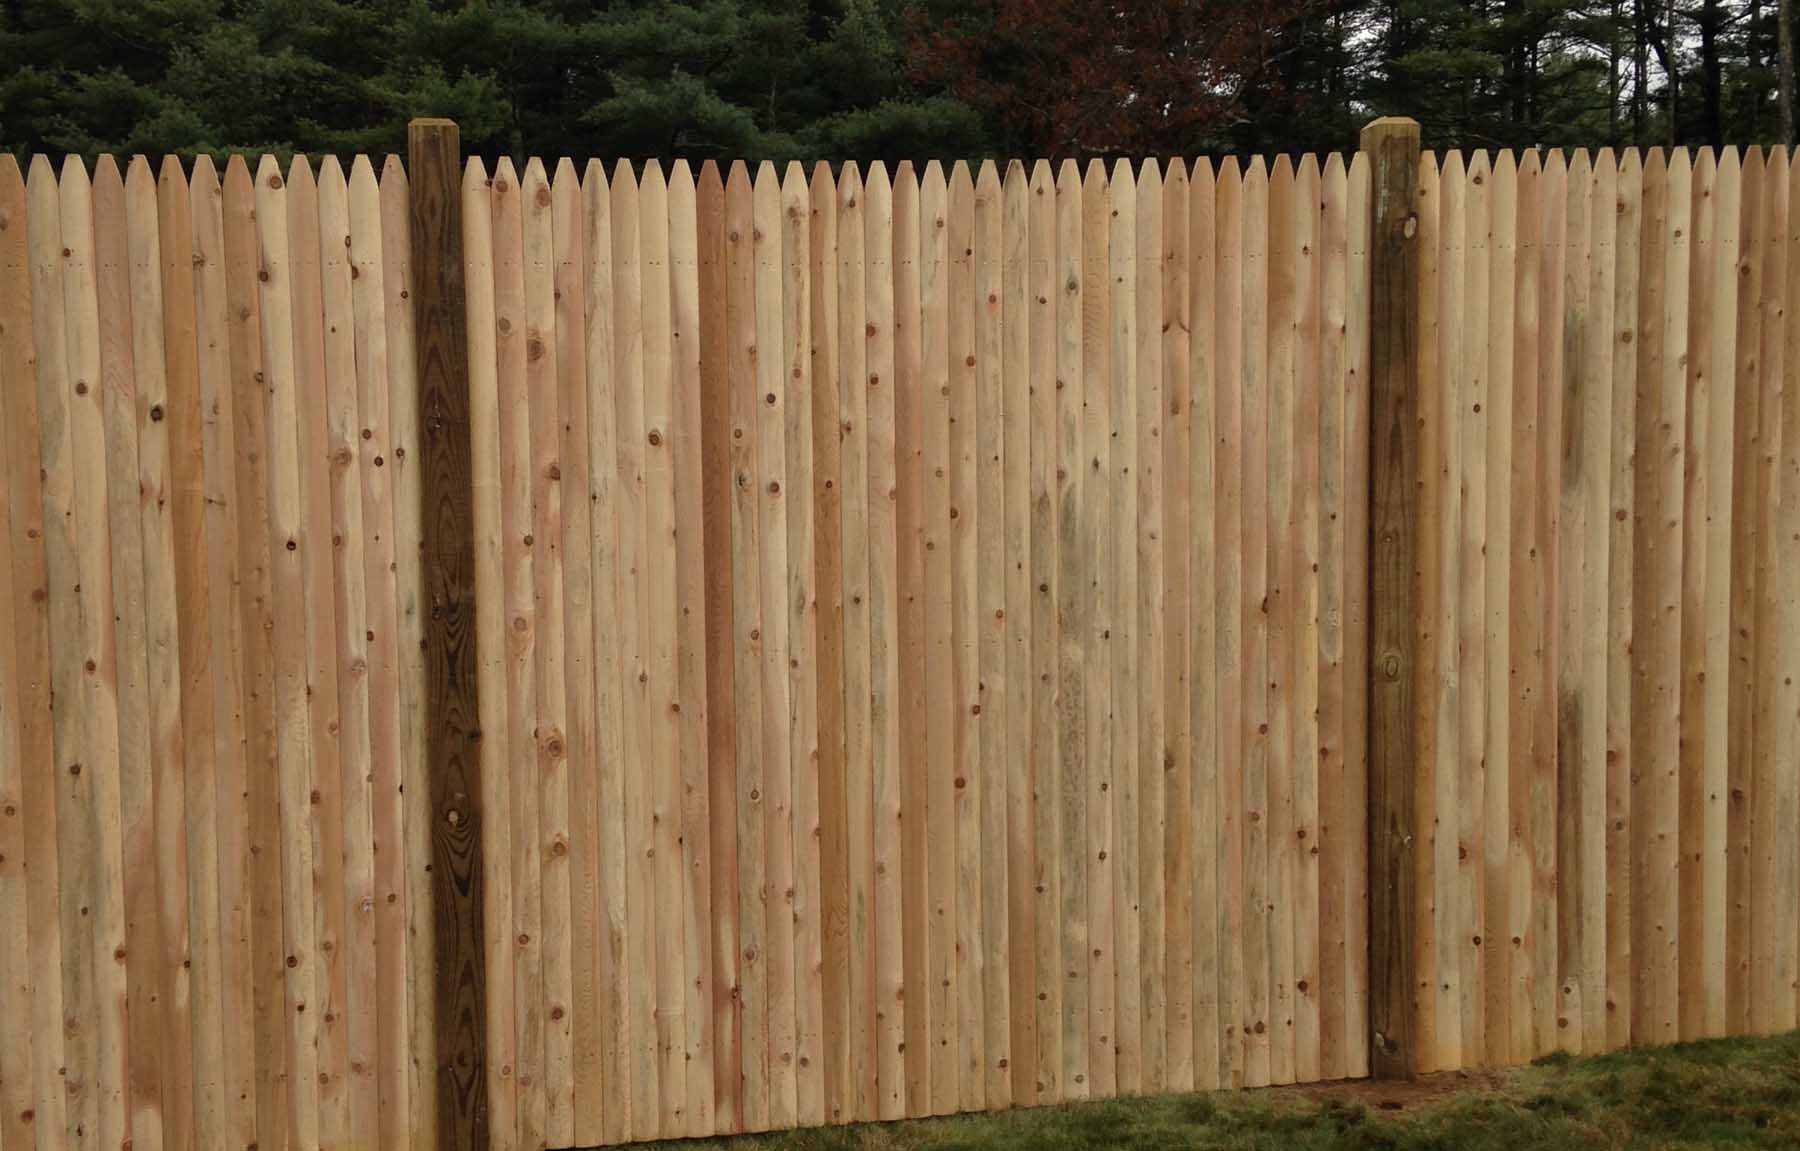 Wood Privacy Screen Fence Installation in Massachusetts - Bottom 2